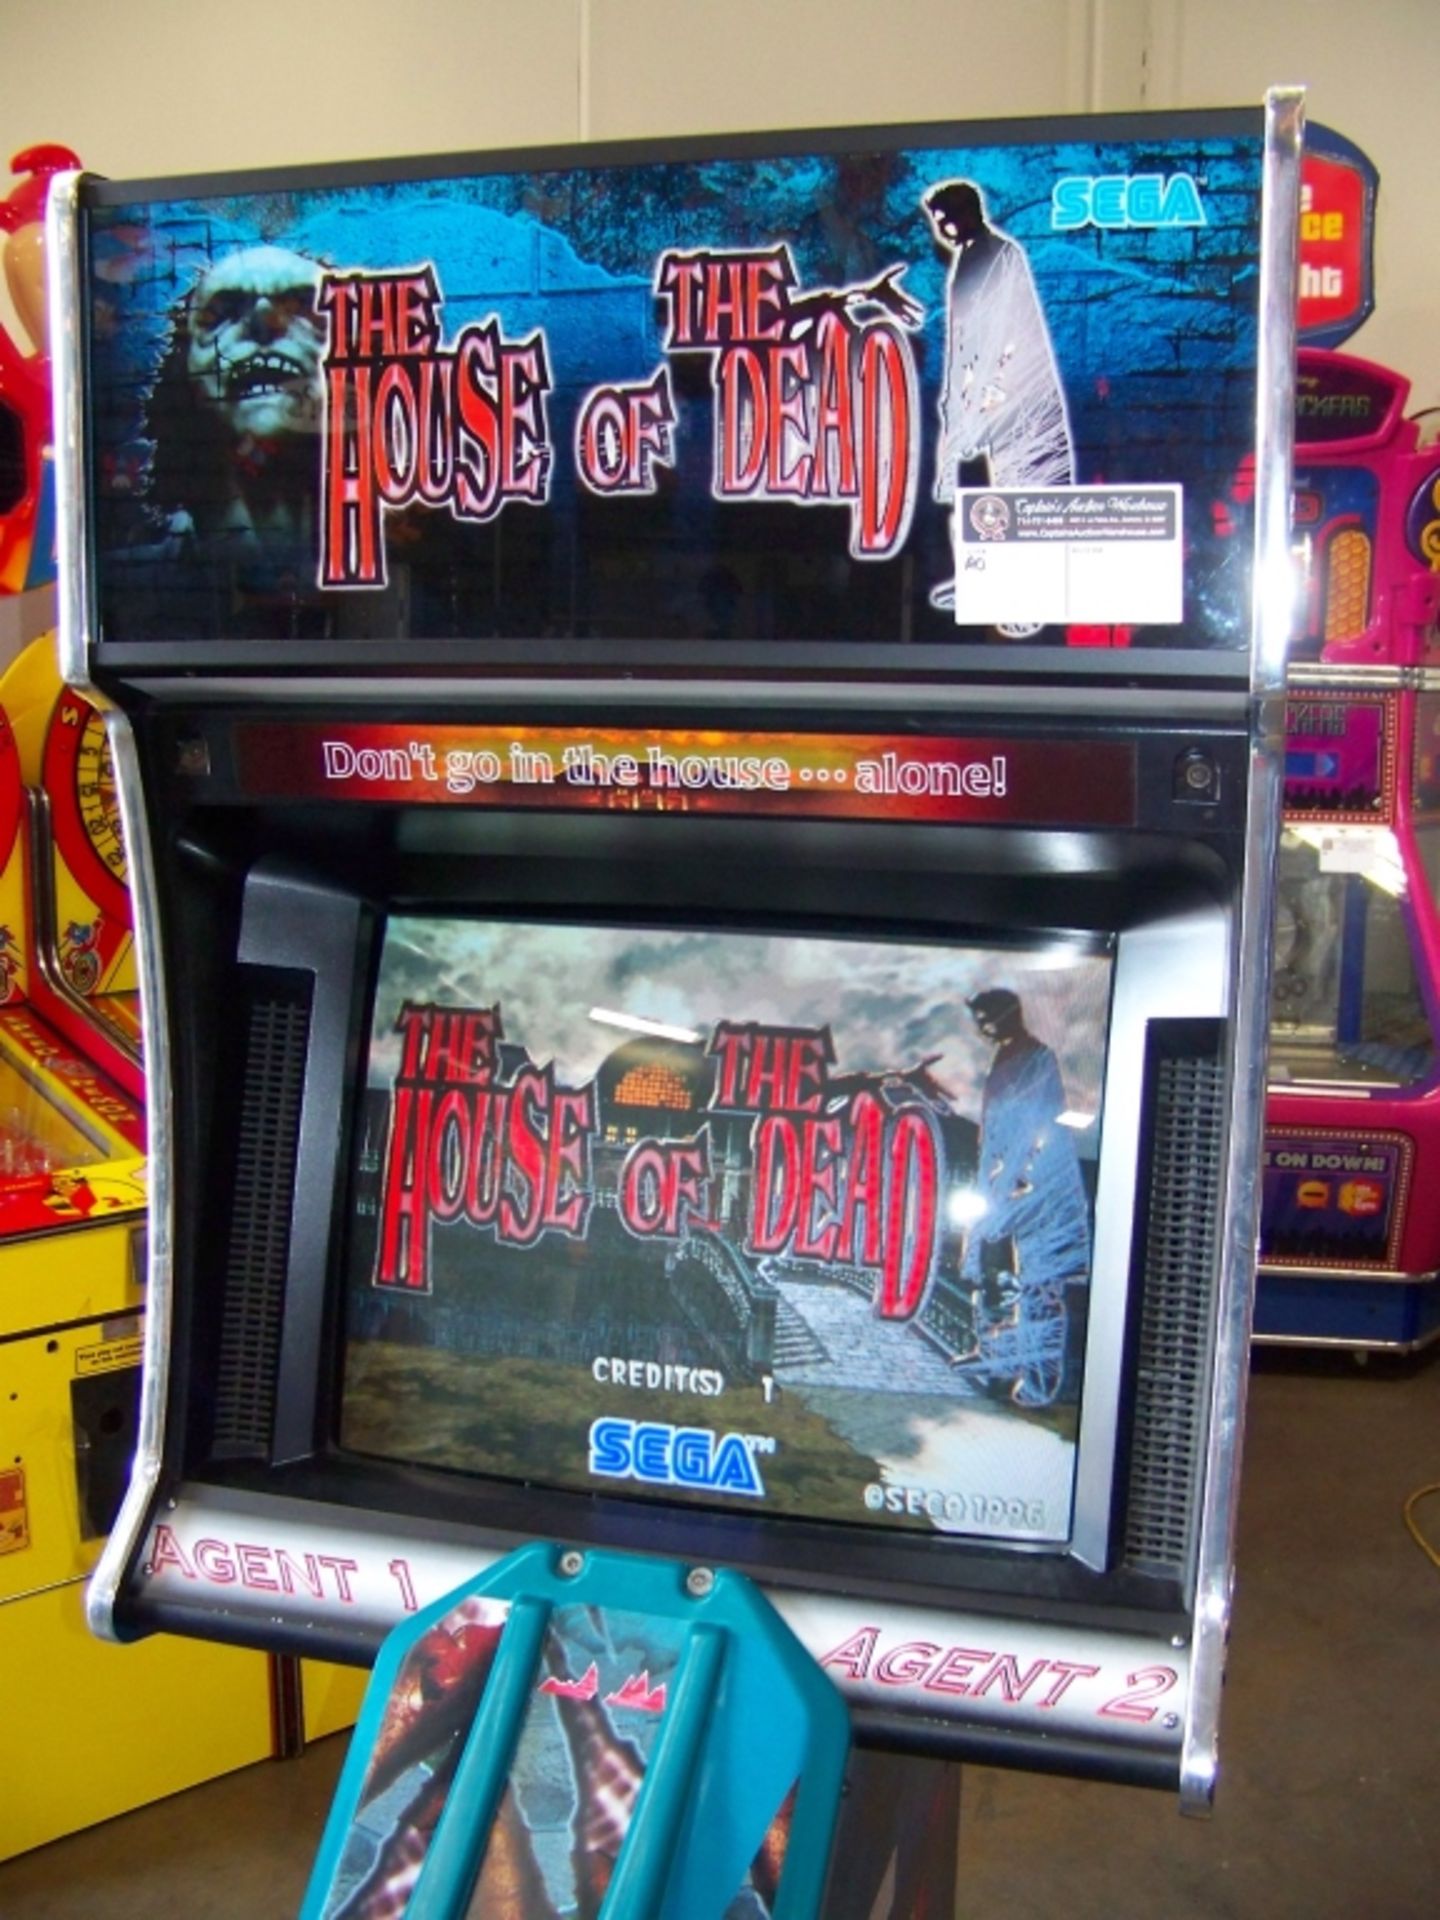 THE HOUSE OF THE DEAD SHOOTER ARCADE GAME SEGA - Image 5 of 7